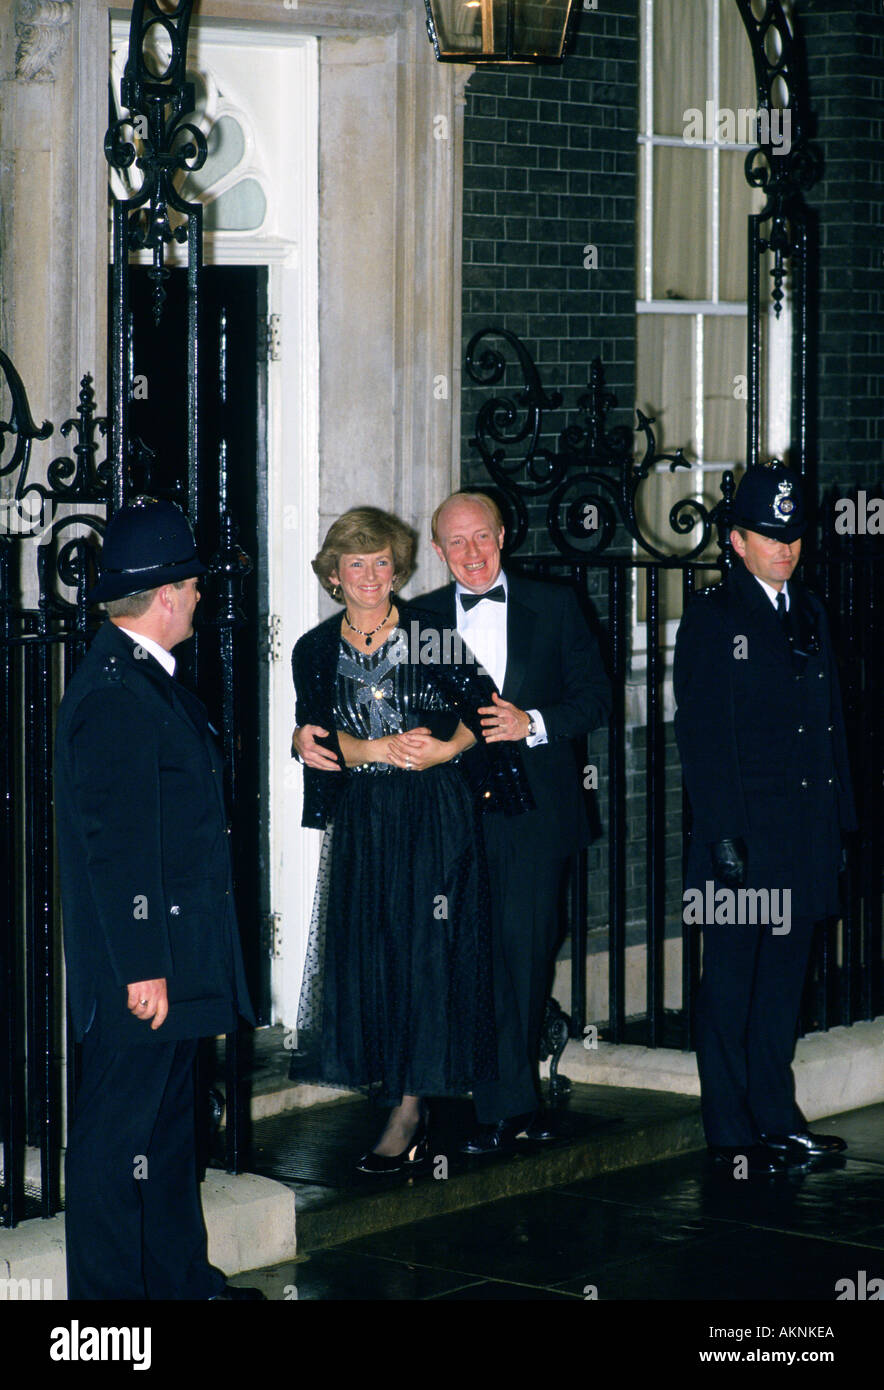 Former Labour party leader Neil Kinnock and wife Glenys outside number 10 Downing Street London UK Stock Photo